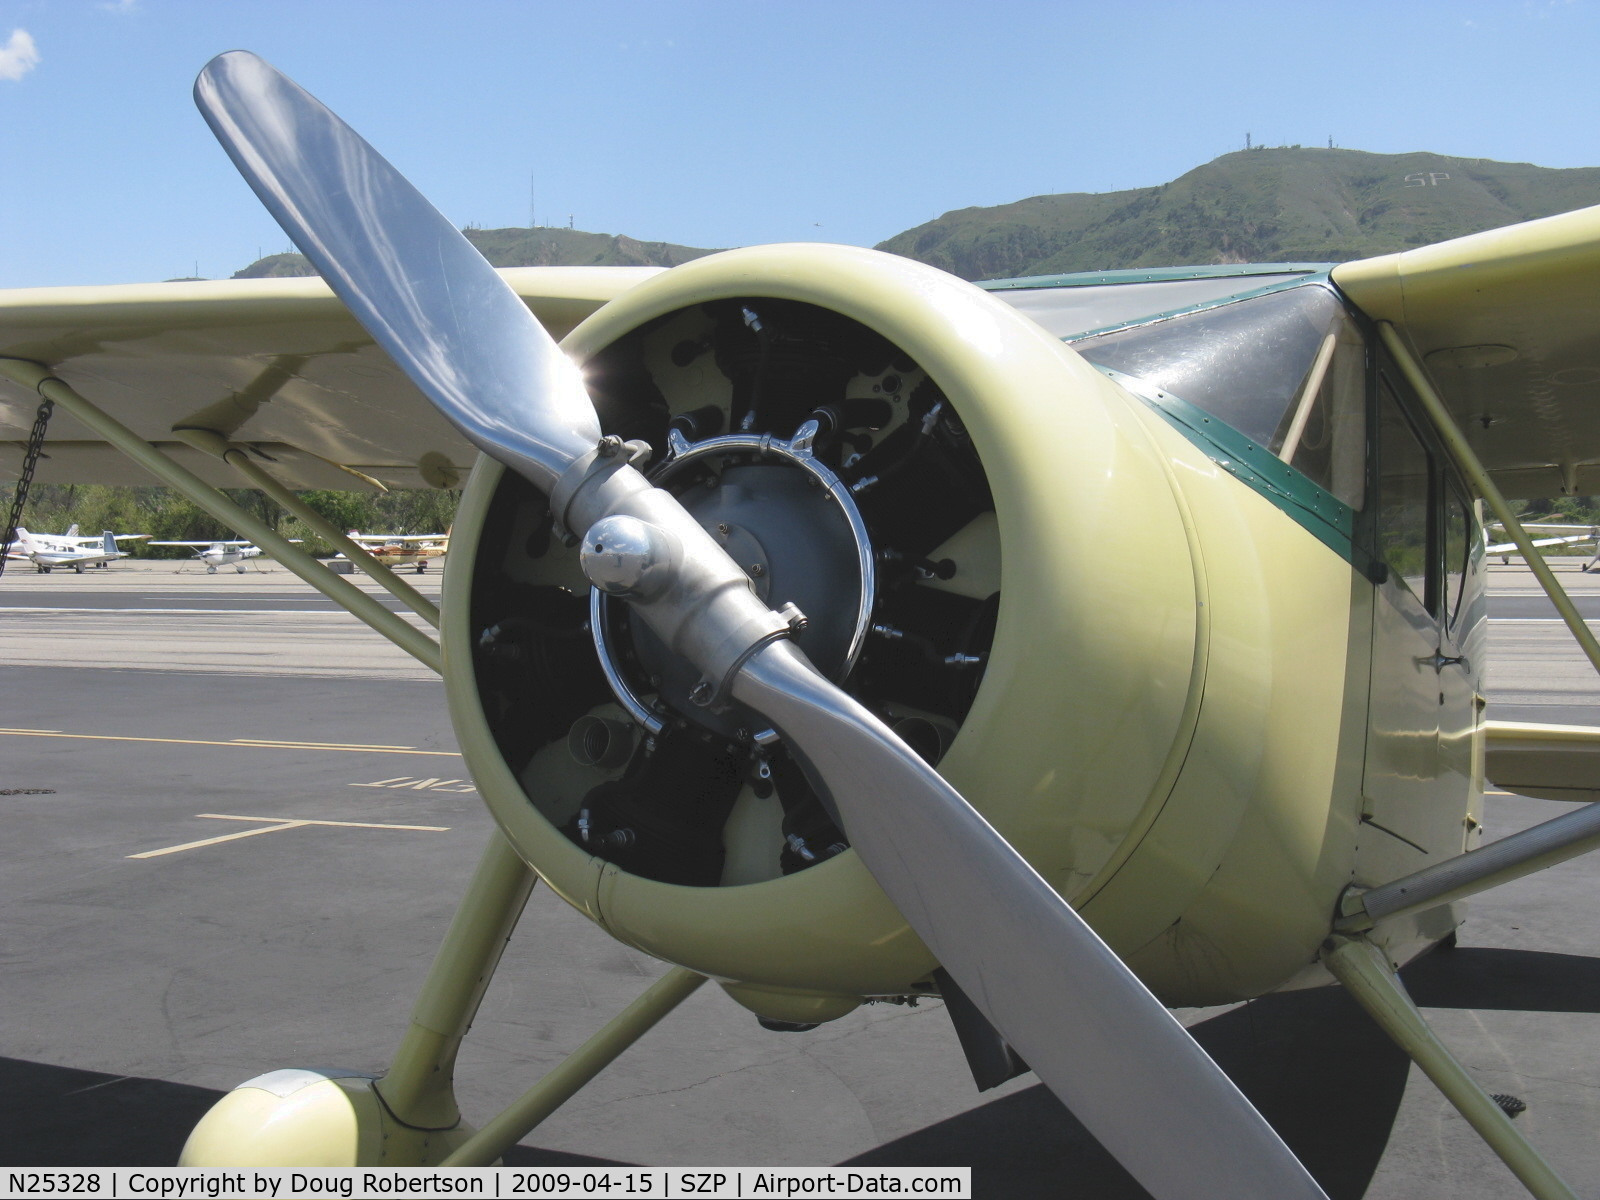 N25328, 1940 Fairchild 24W-40 C/N W40-114, 1940 Fairchild 24W-40, Warner Super Scarab 165 165 Hp/175 Hp for takeoff radial upgrade from original 145 Hp, smooth cowled engine and chromed prop